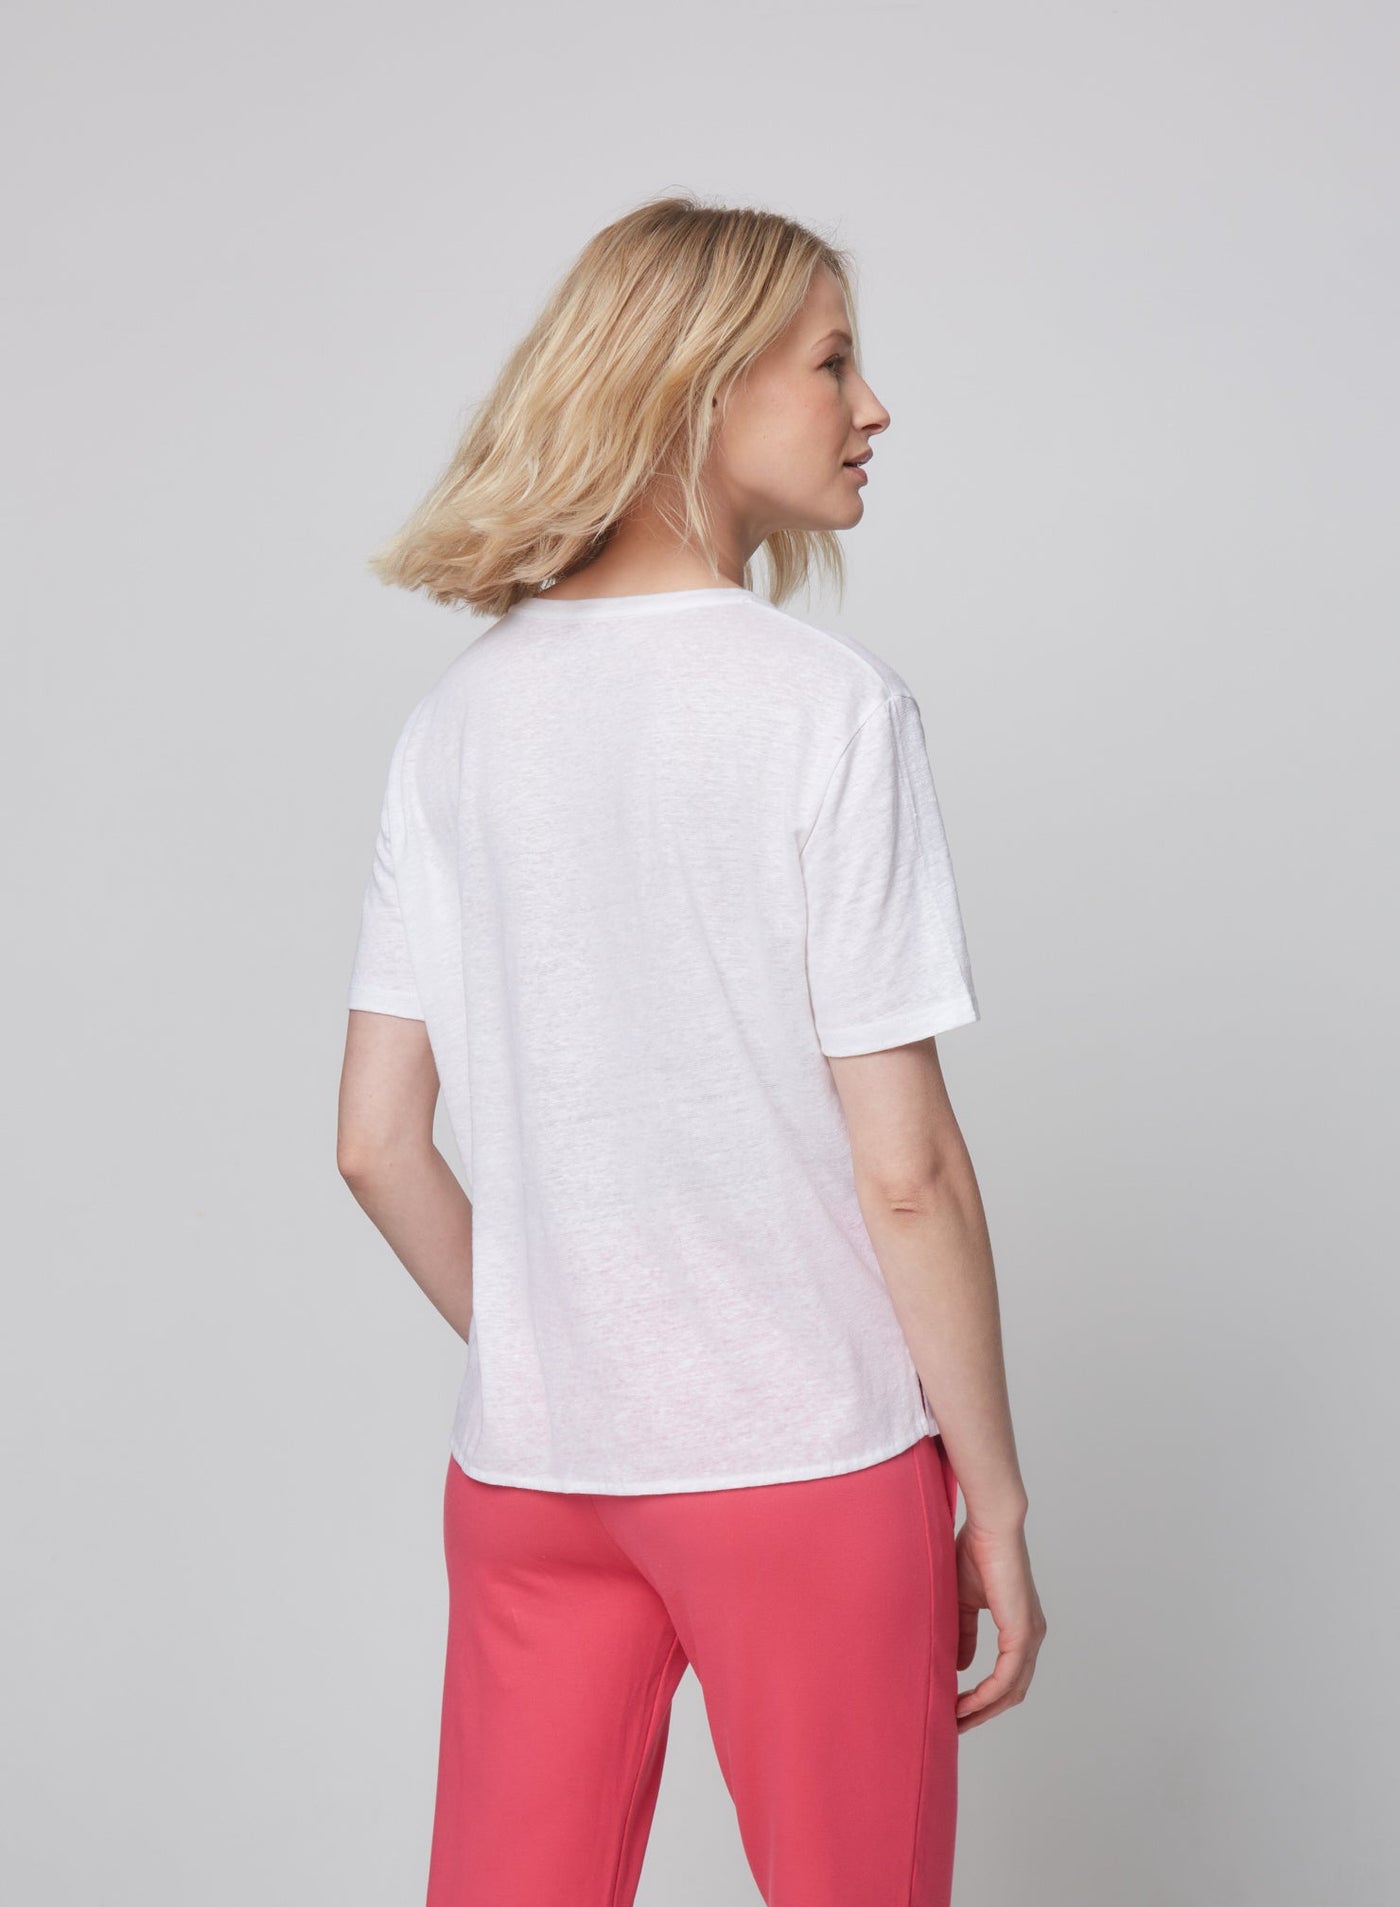 Stretch Linen Relaxed Fit Elbow Sleeve Crewneck T-Shirt - CREW ELBOW SLV - Majestic Filatures North America